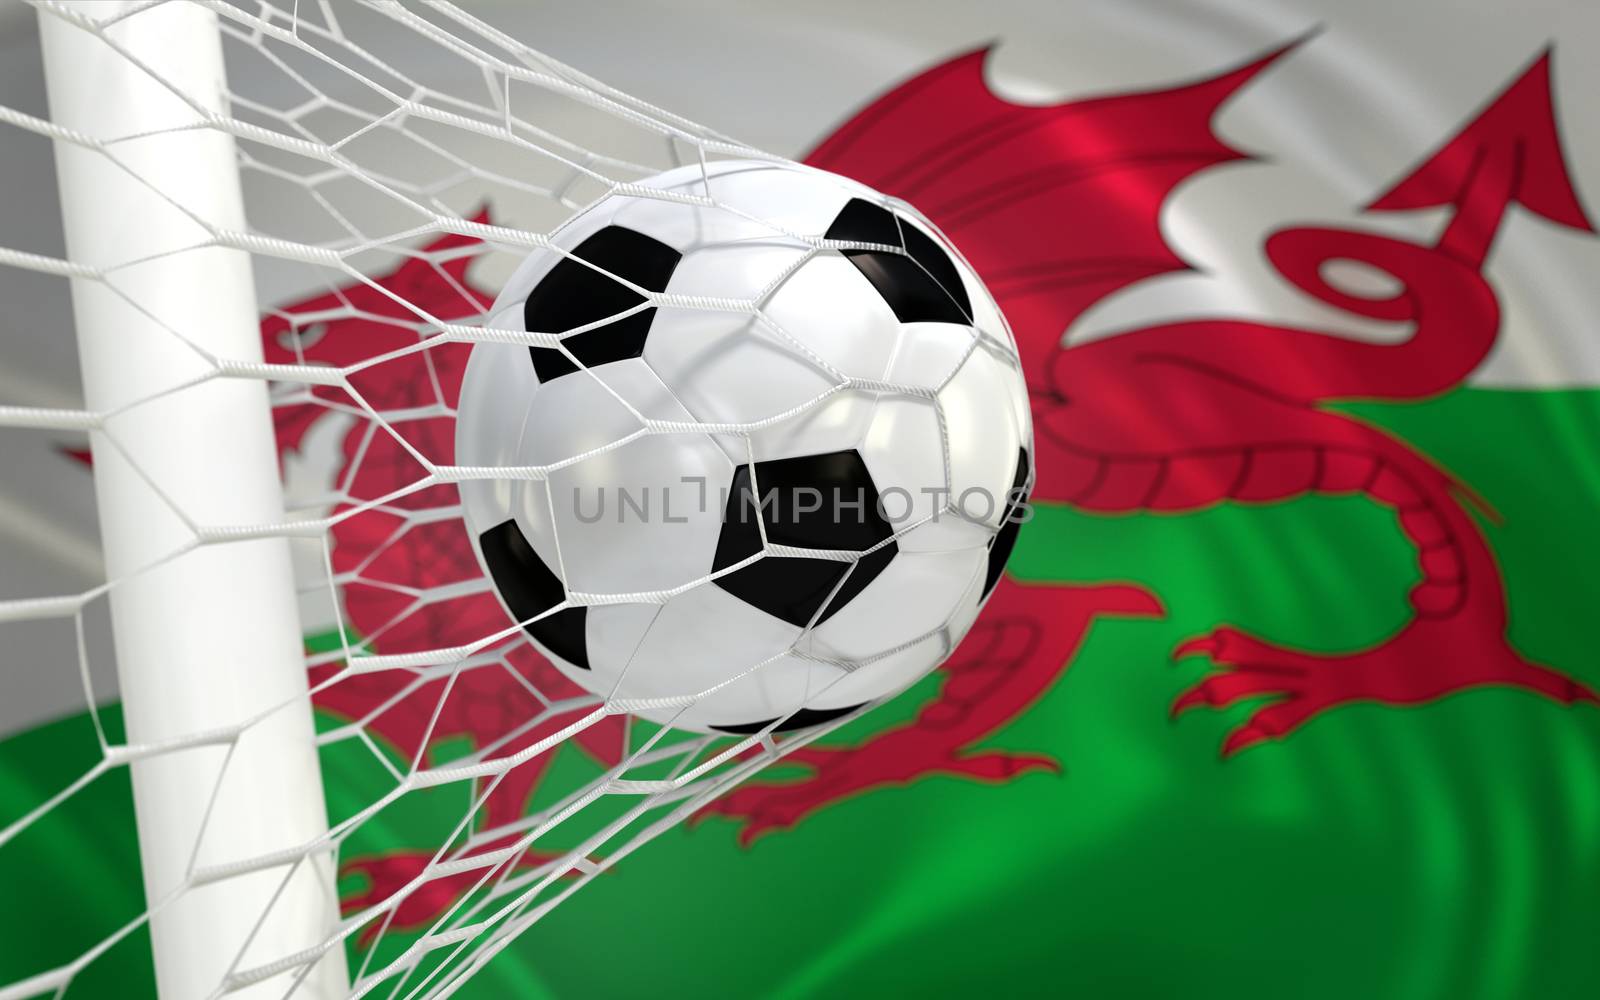 Wales flag and soccer ball, football in goal net